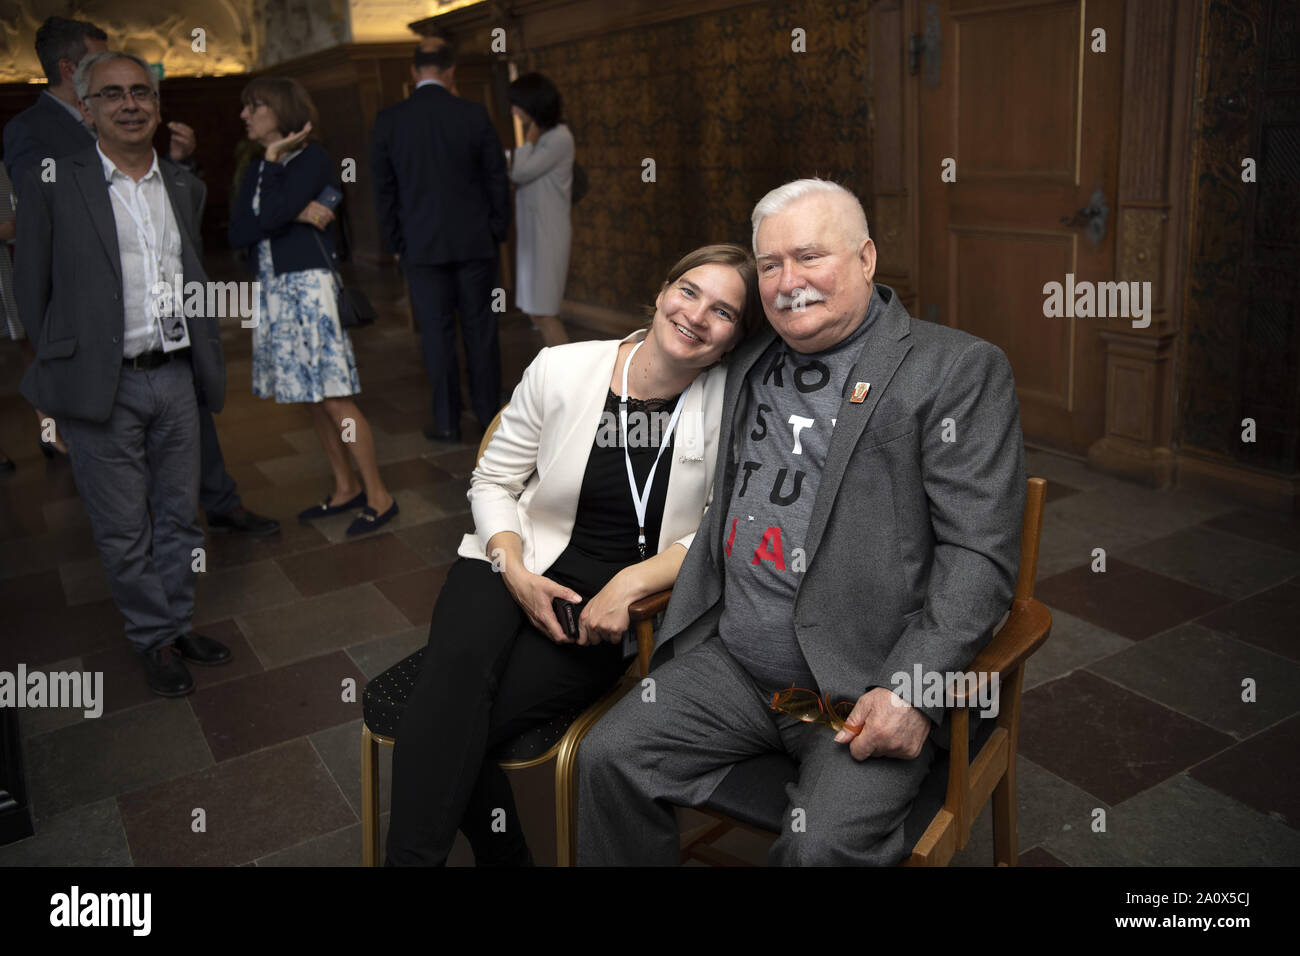 KÃ¸Benhavn, Danmark. 8th Sep, 2019. Lech Walesa, former President in Poland and founder og the free Polish union SolidarnoÅ›Ä‡ is at Frederiksborg Castle where his family coat of arms is presentet and placed in the castle church. The family coat of arms is made for all recipients og the Danish Order of the Elephant that he received in 1993. The former President also had plenty og time for selfies with guests and organisers of his trip to Denmark.Foto: Lars Moeller Credit: Lars Moeller/ZUMA Wire/Alamy Live News Stock Photo